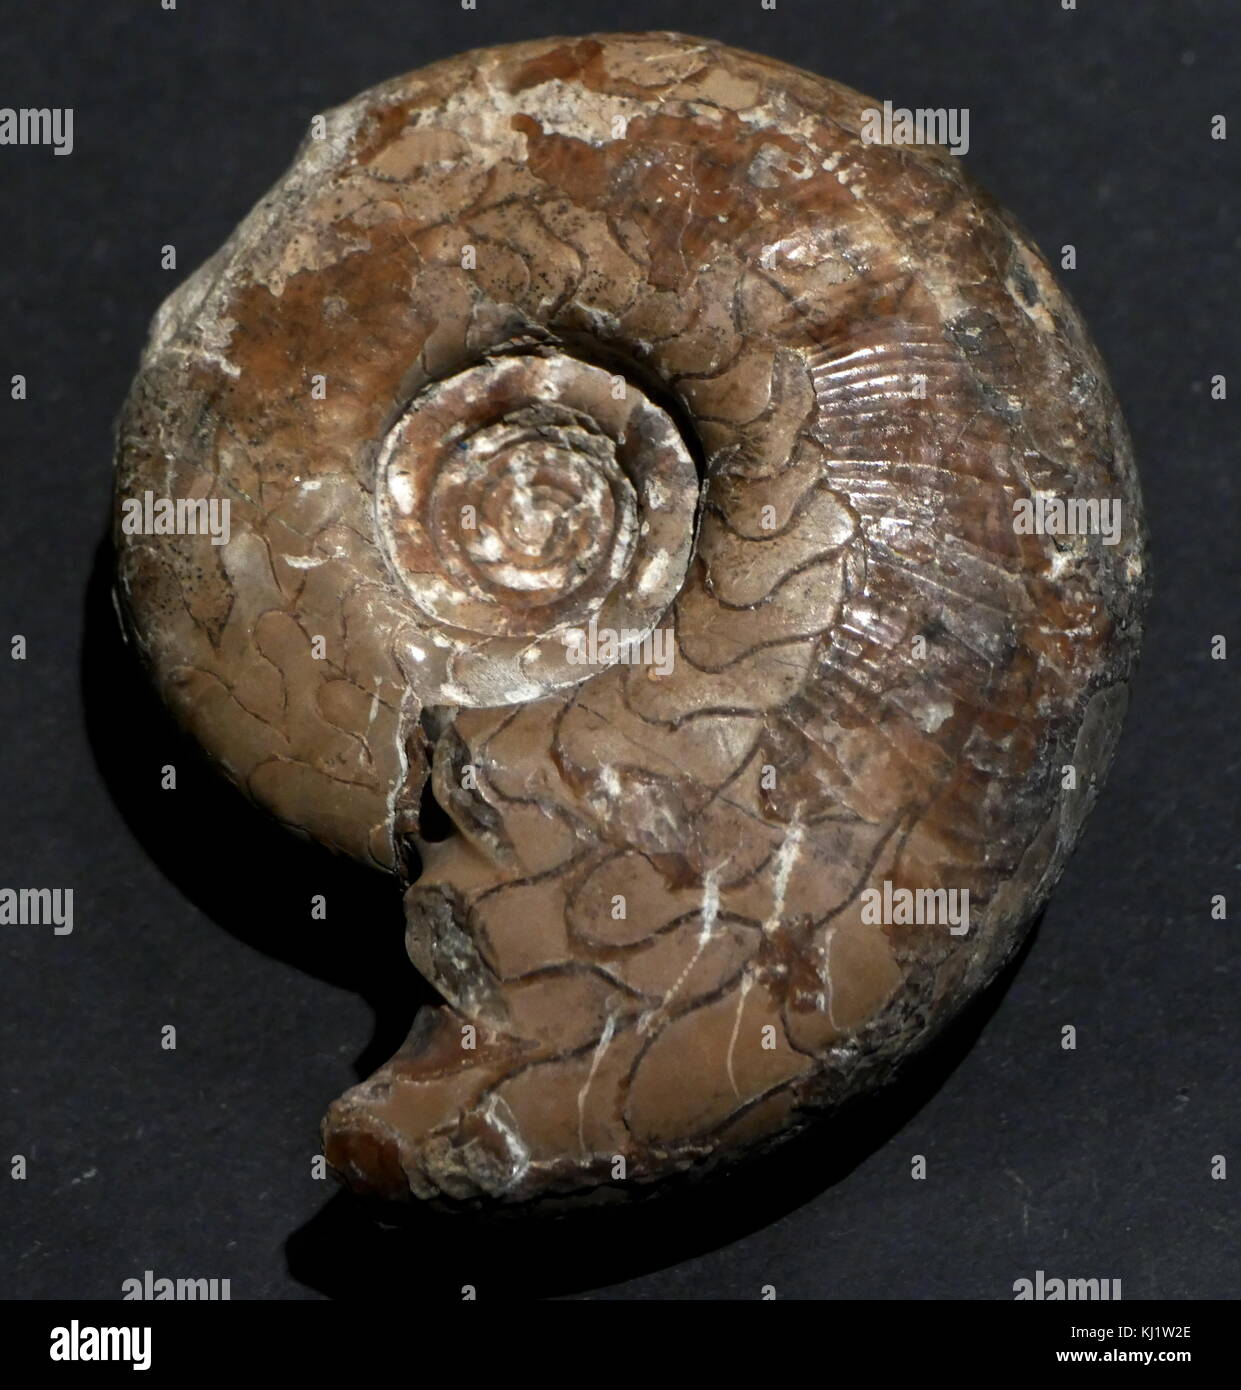 Remains of an animal preserved as a fossil. Stock Photo